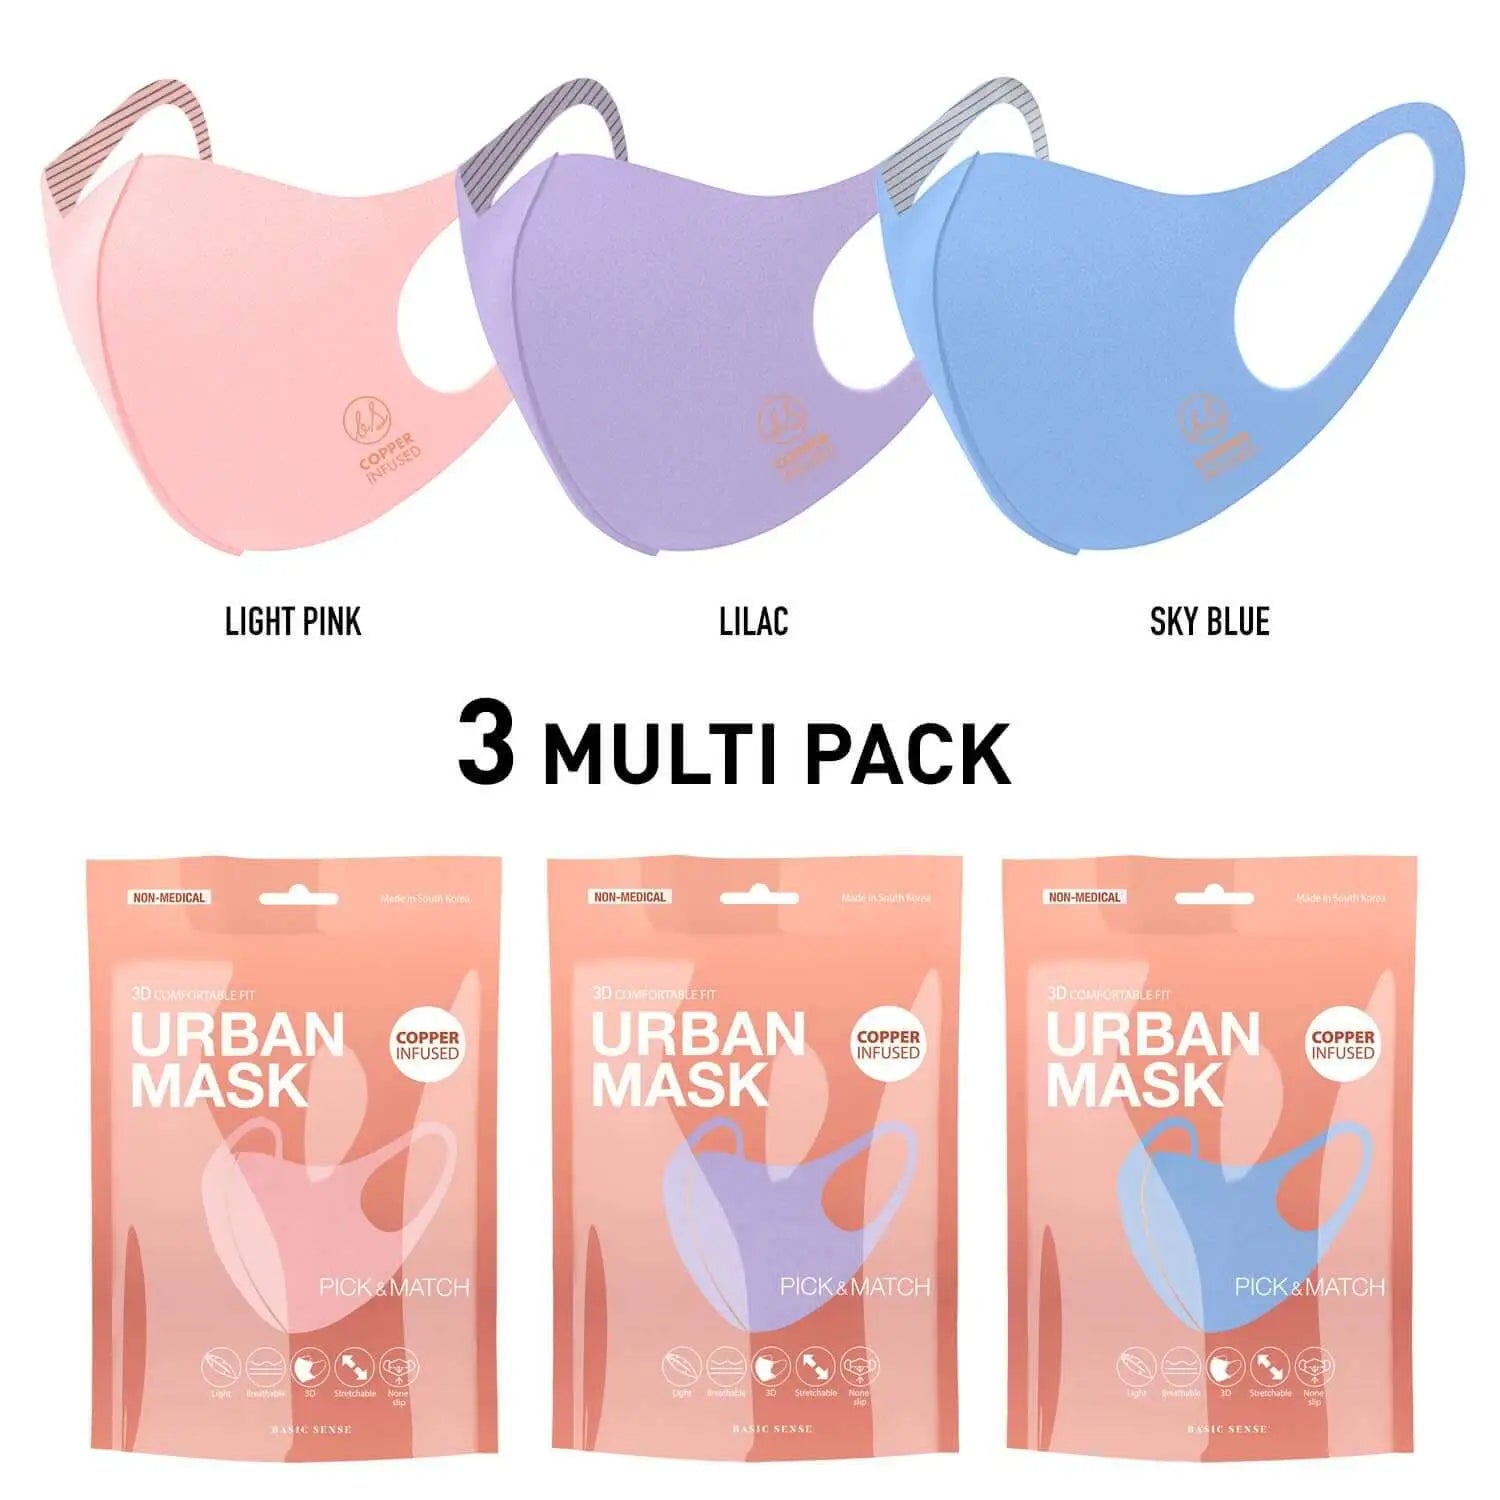 3 pack of 3 copper infused face masks in various colors for stylish protection